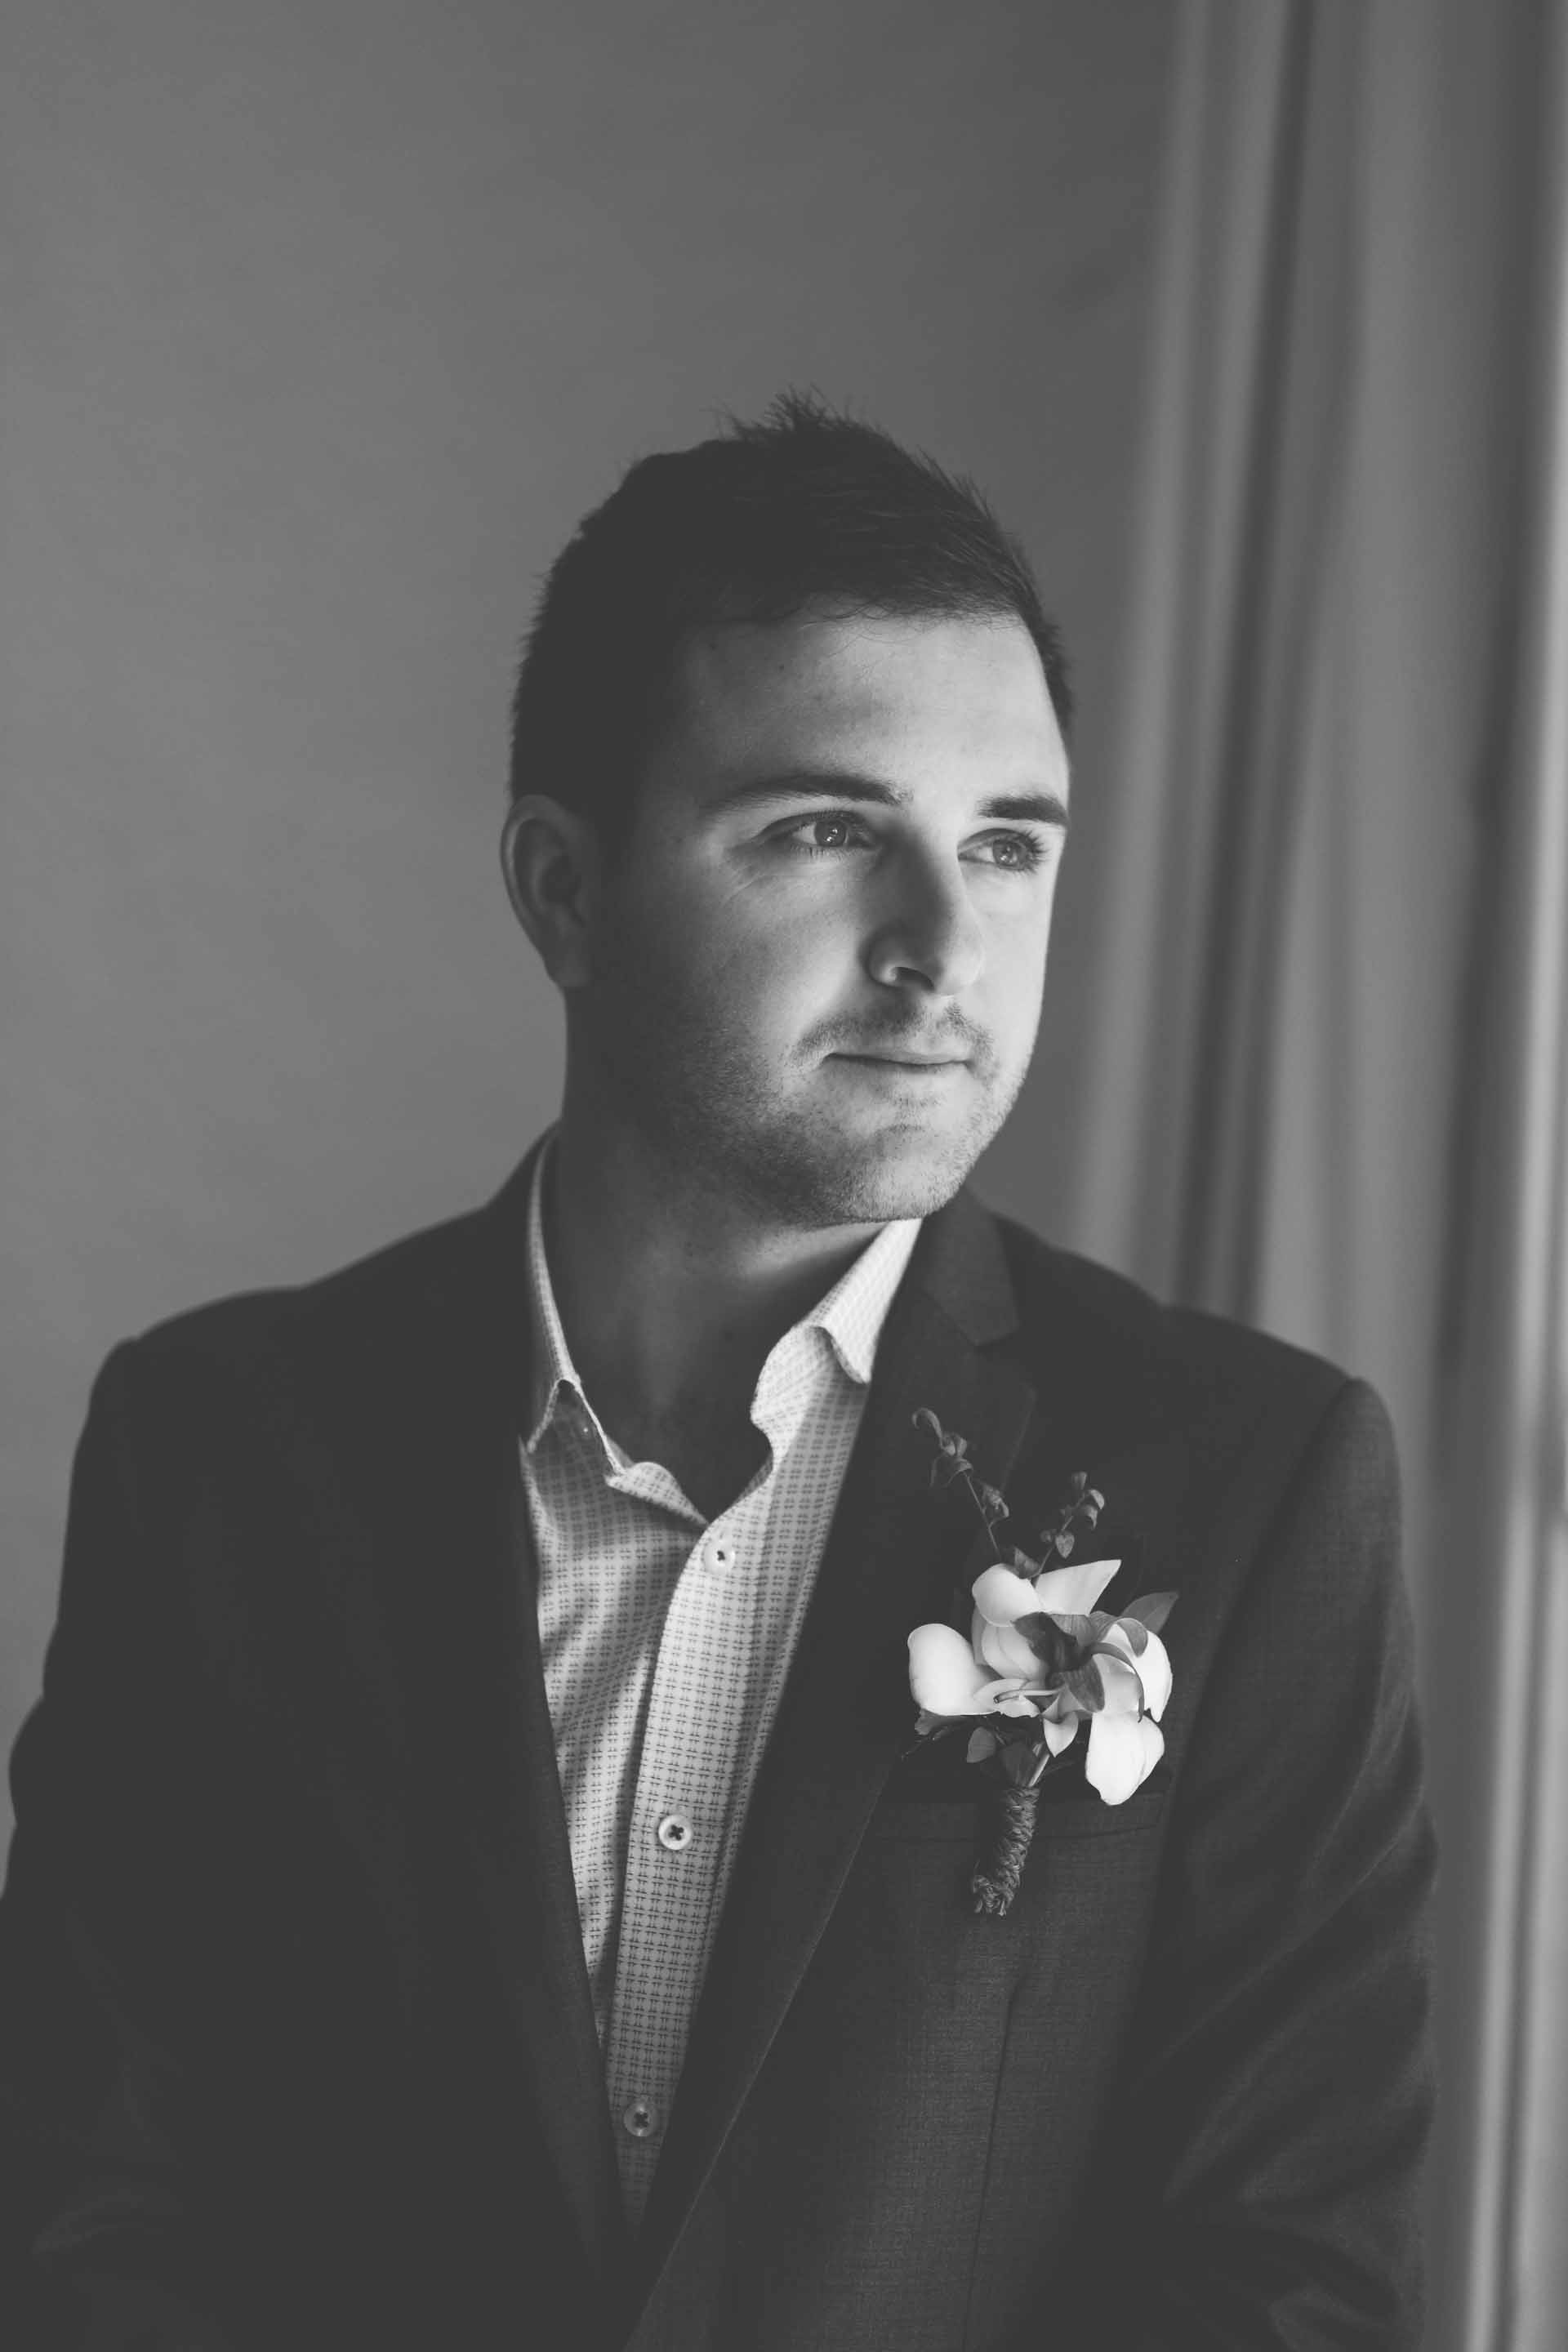 a black and white portrait of the groom looking out the window wearing his wedding suite with boutonnière